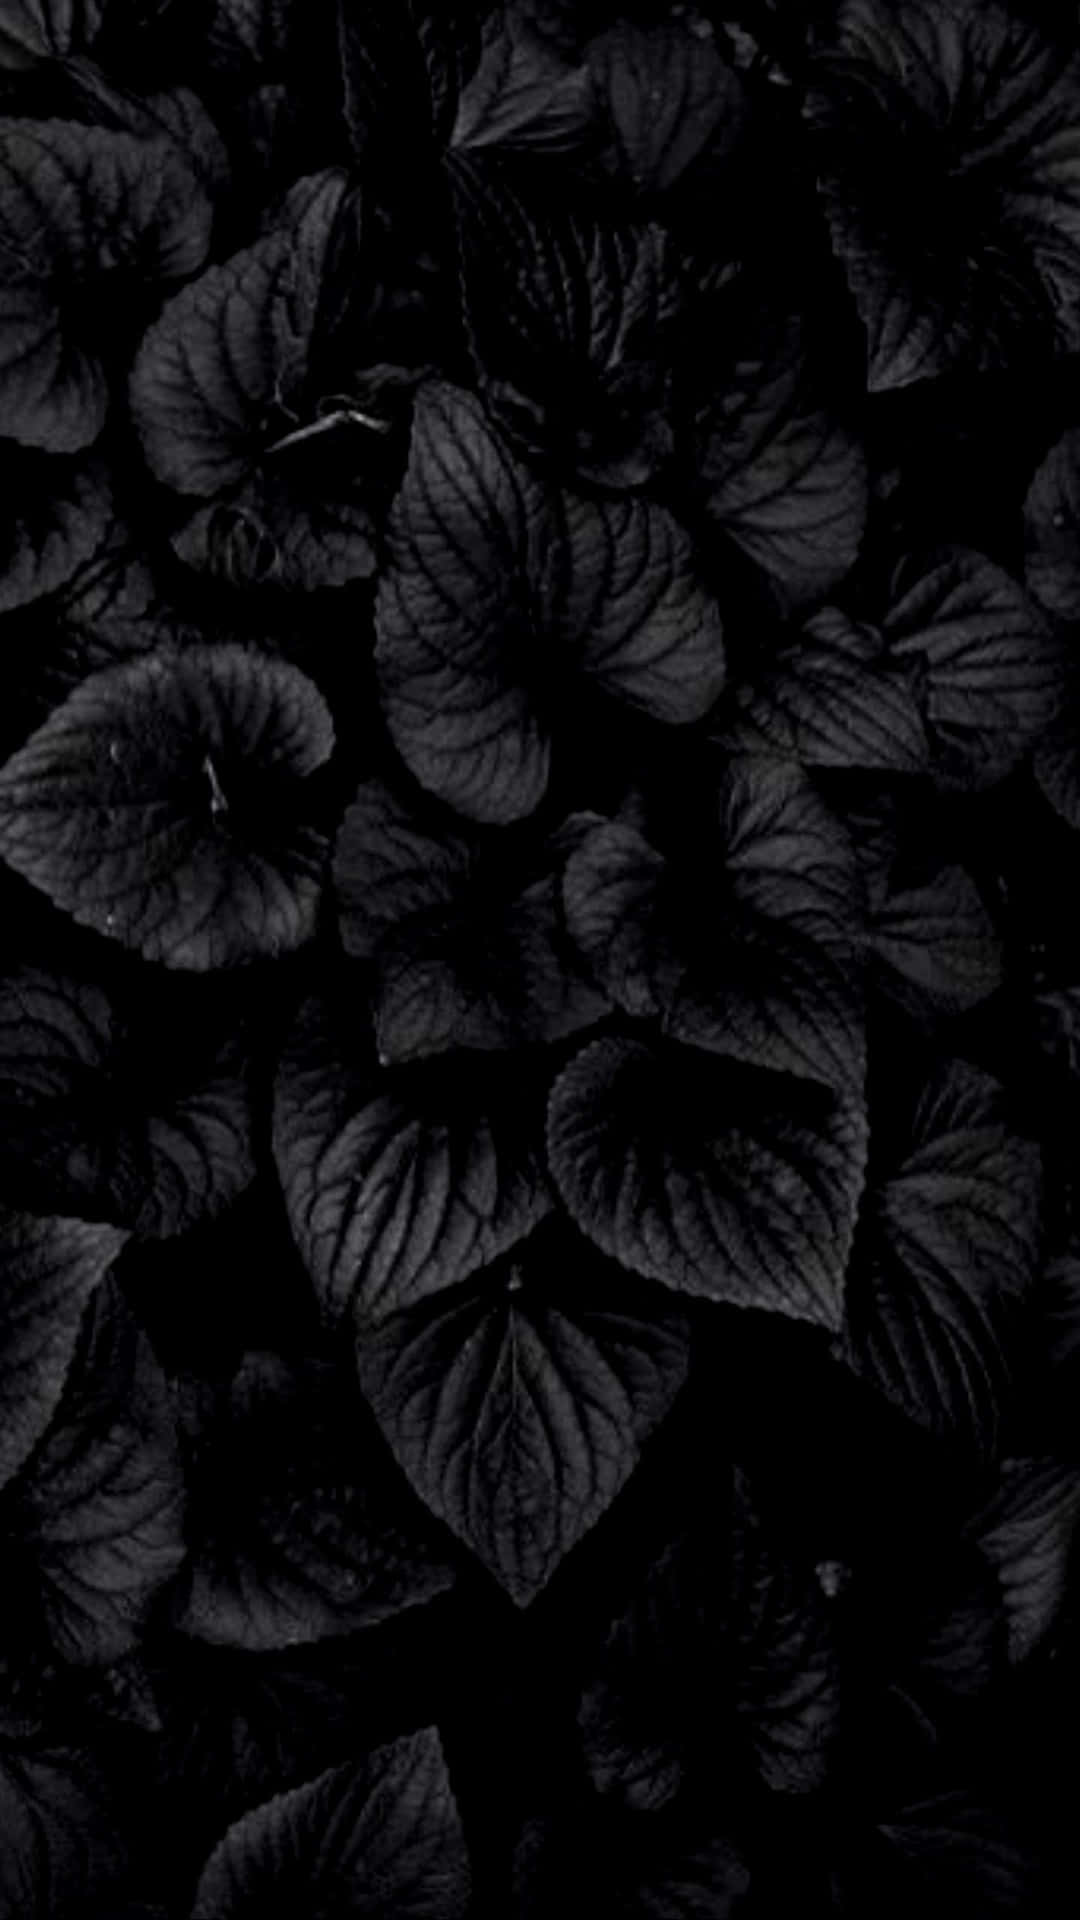 A Black Background With Leaves In The Dark Background